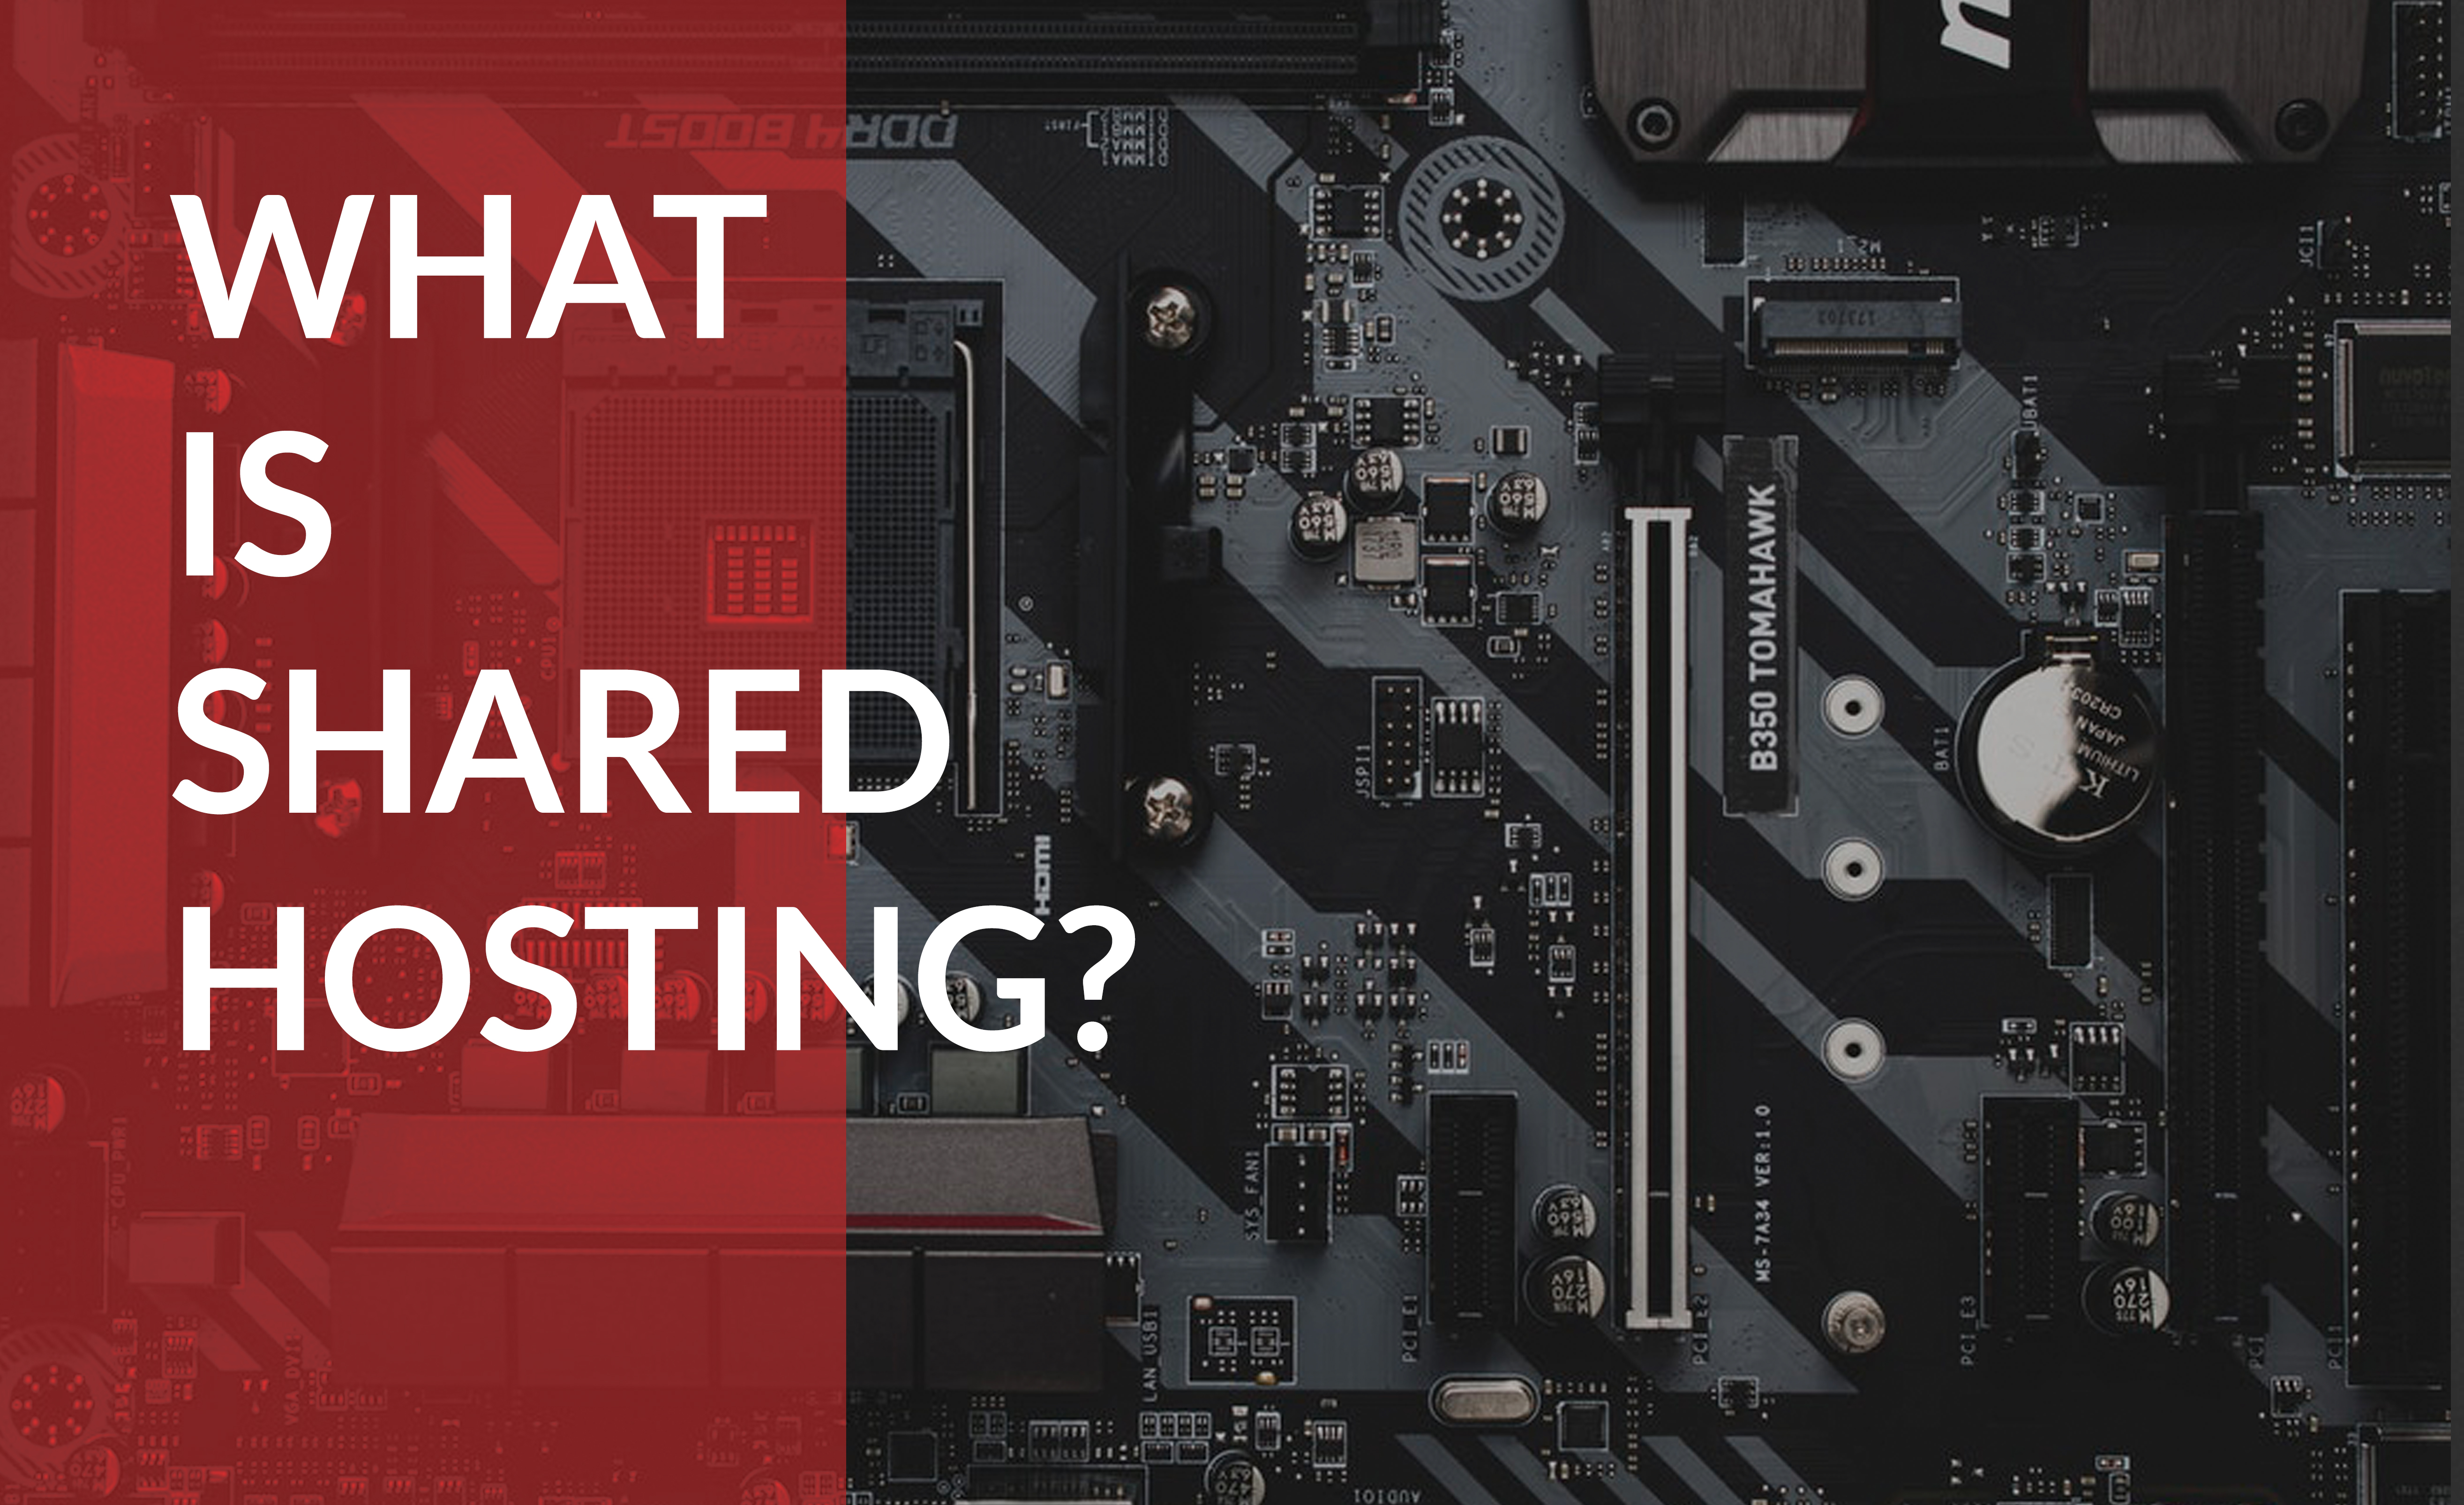 Find out what shared hosting is and how it can help your business.